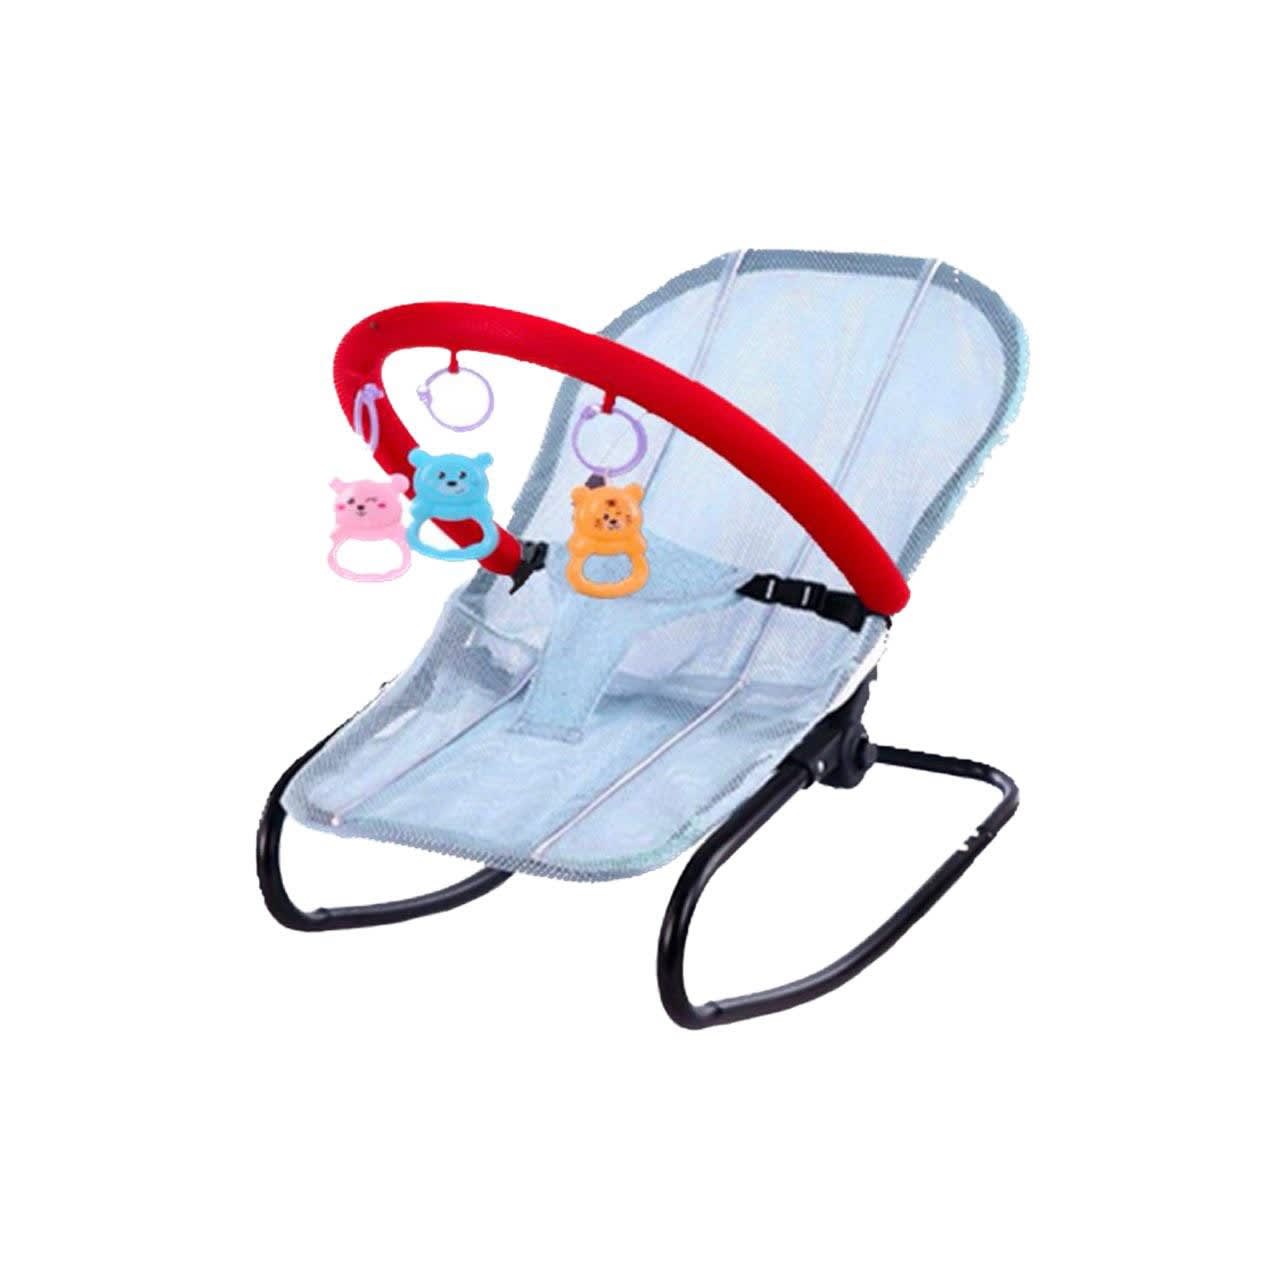 JOI Baby Bouncer Chair